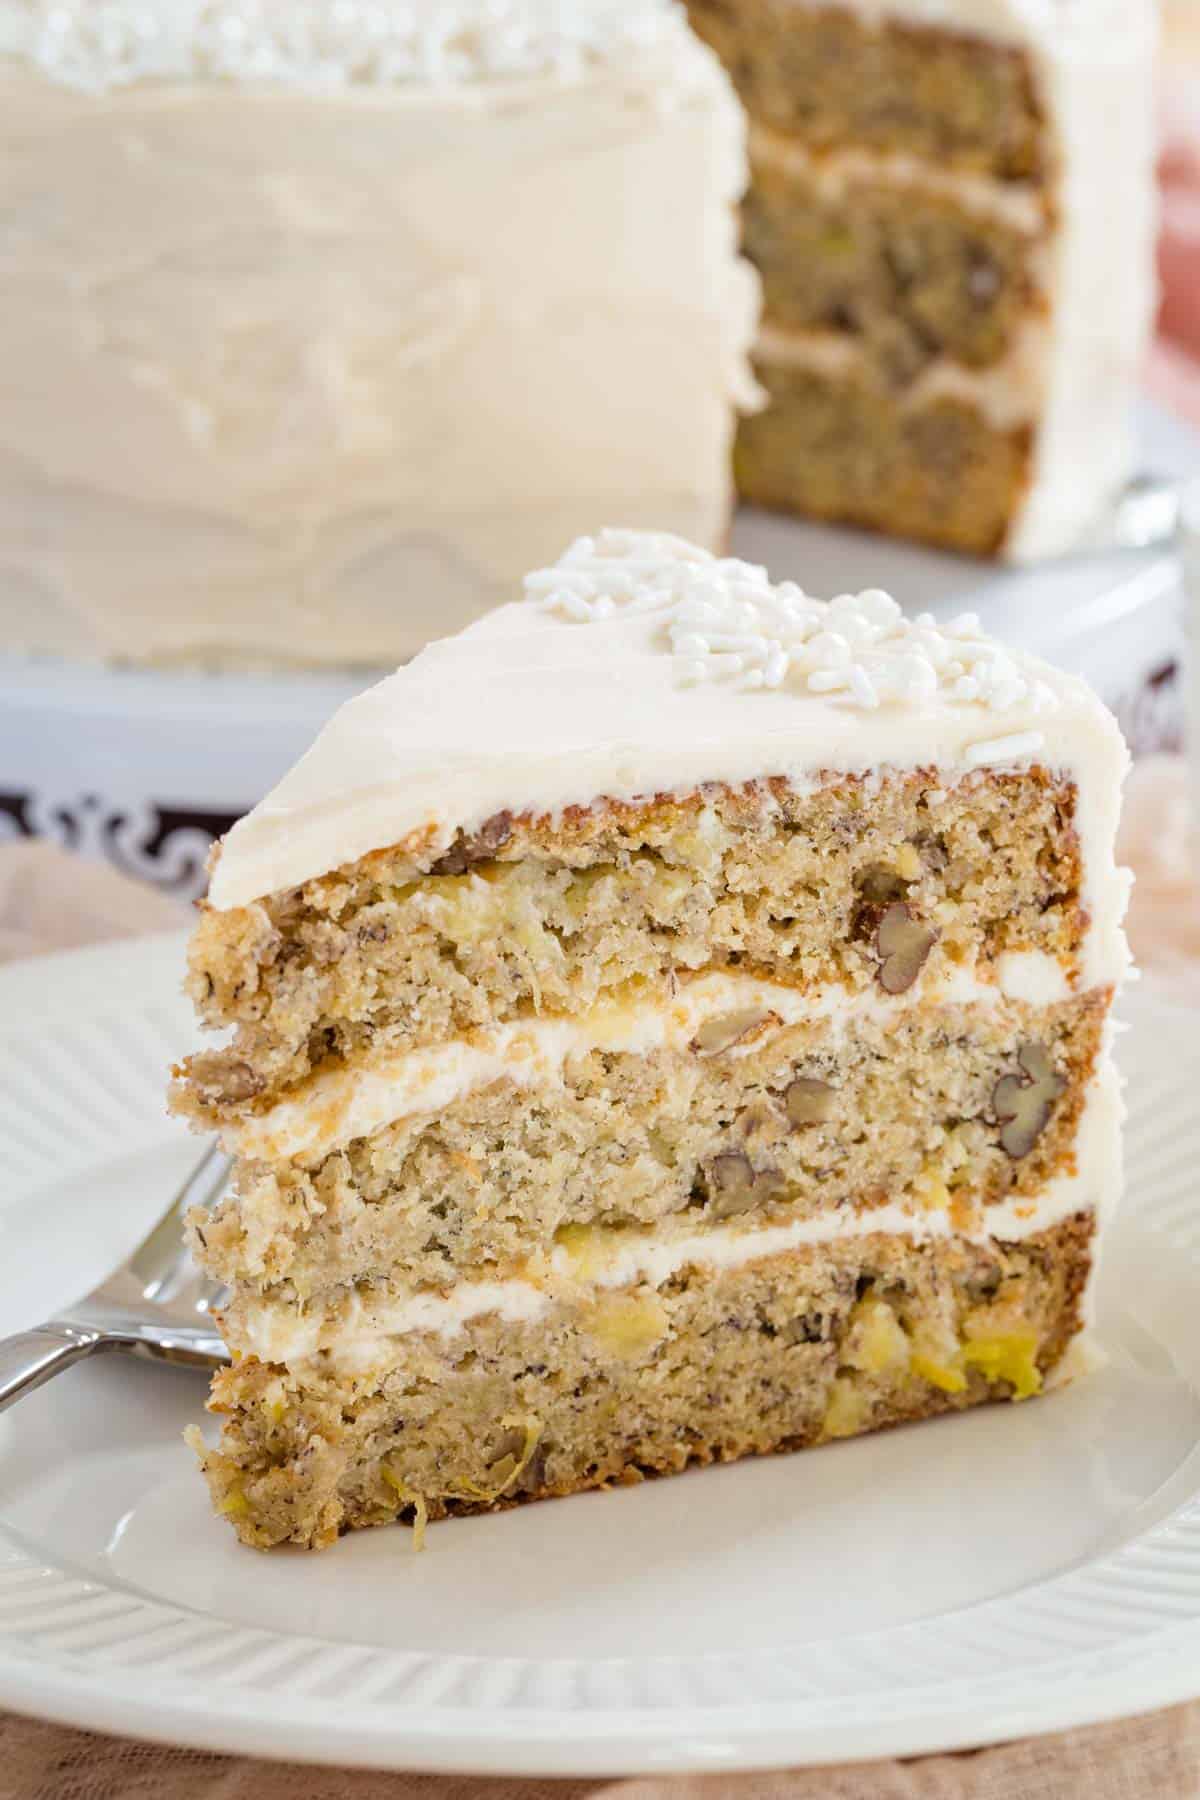 A slice of gluten free hummingbird cake on a plate next to a fork.